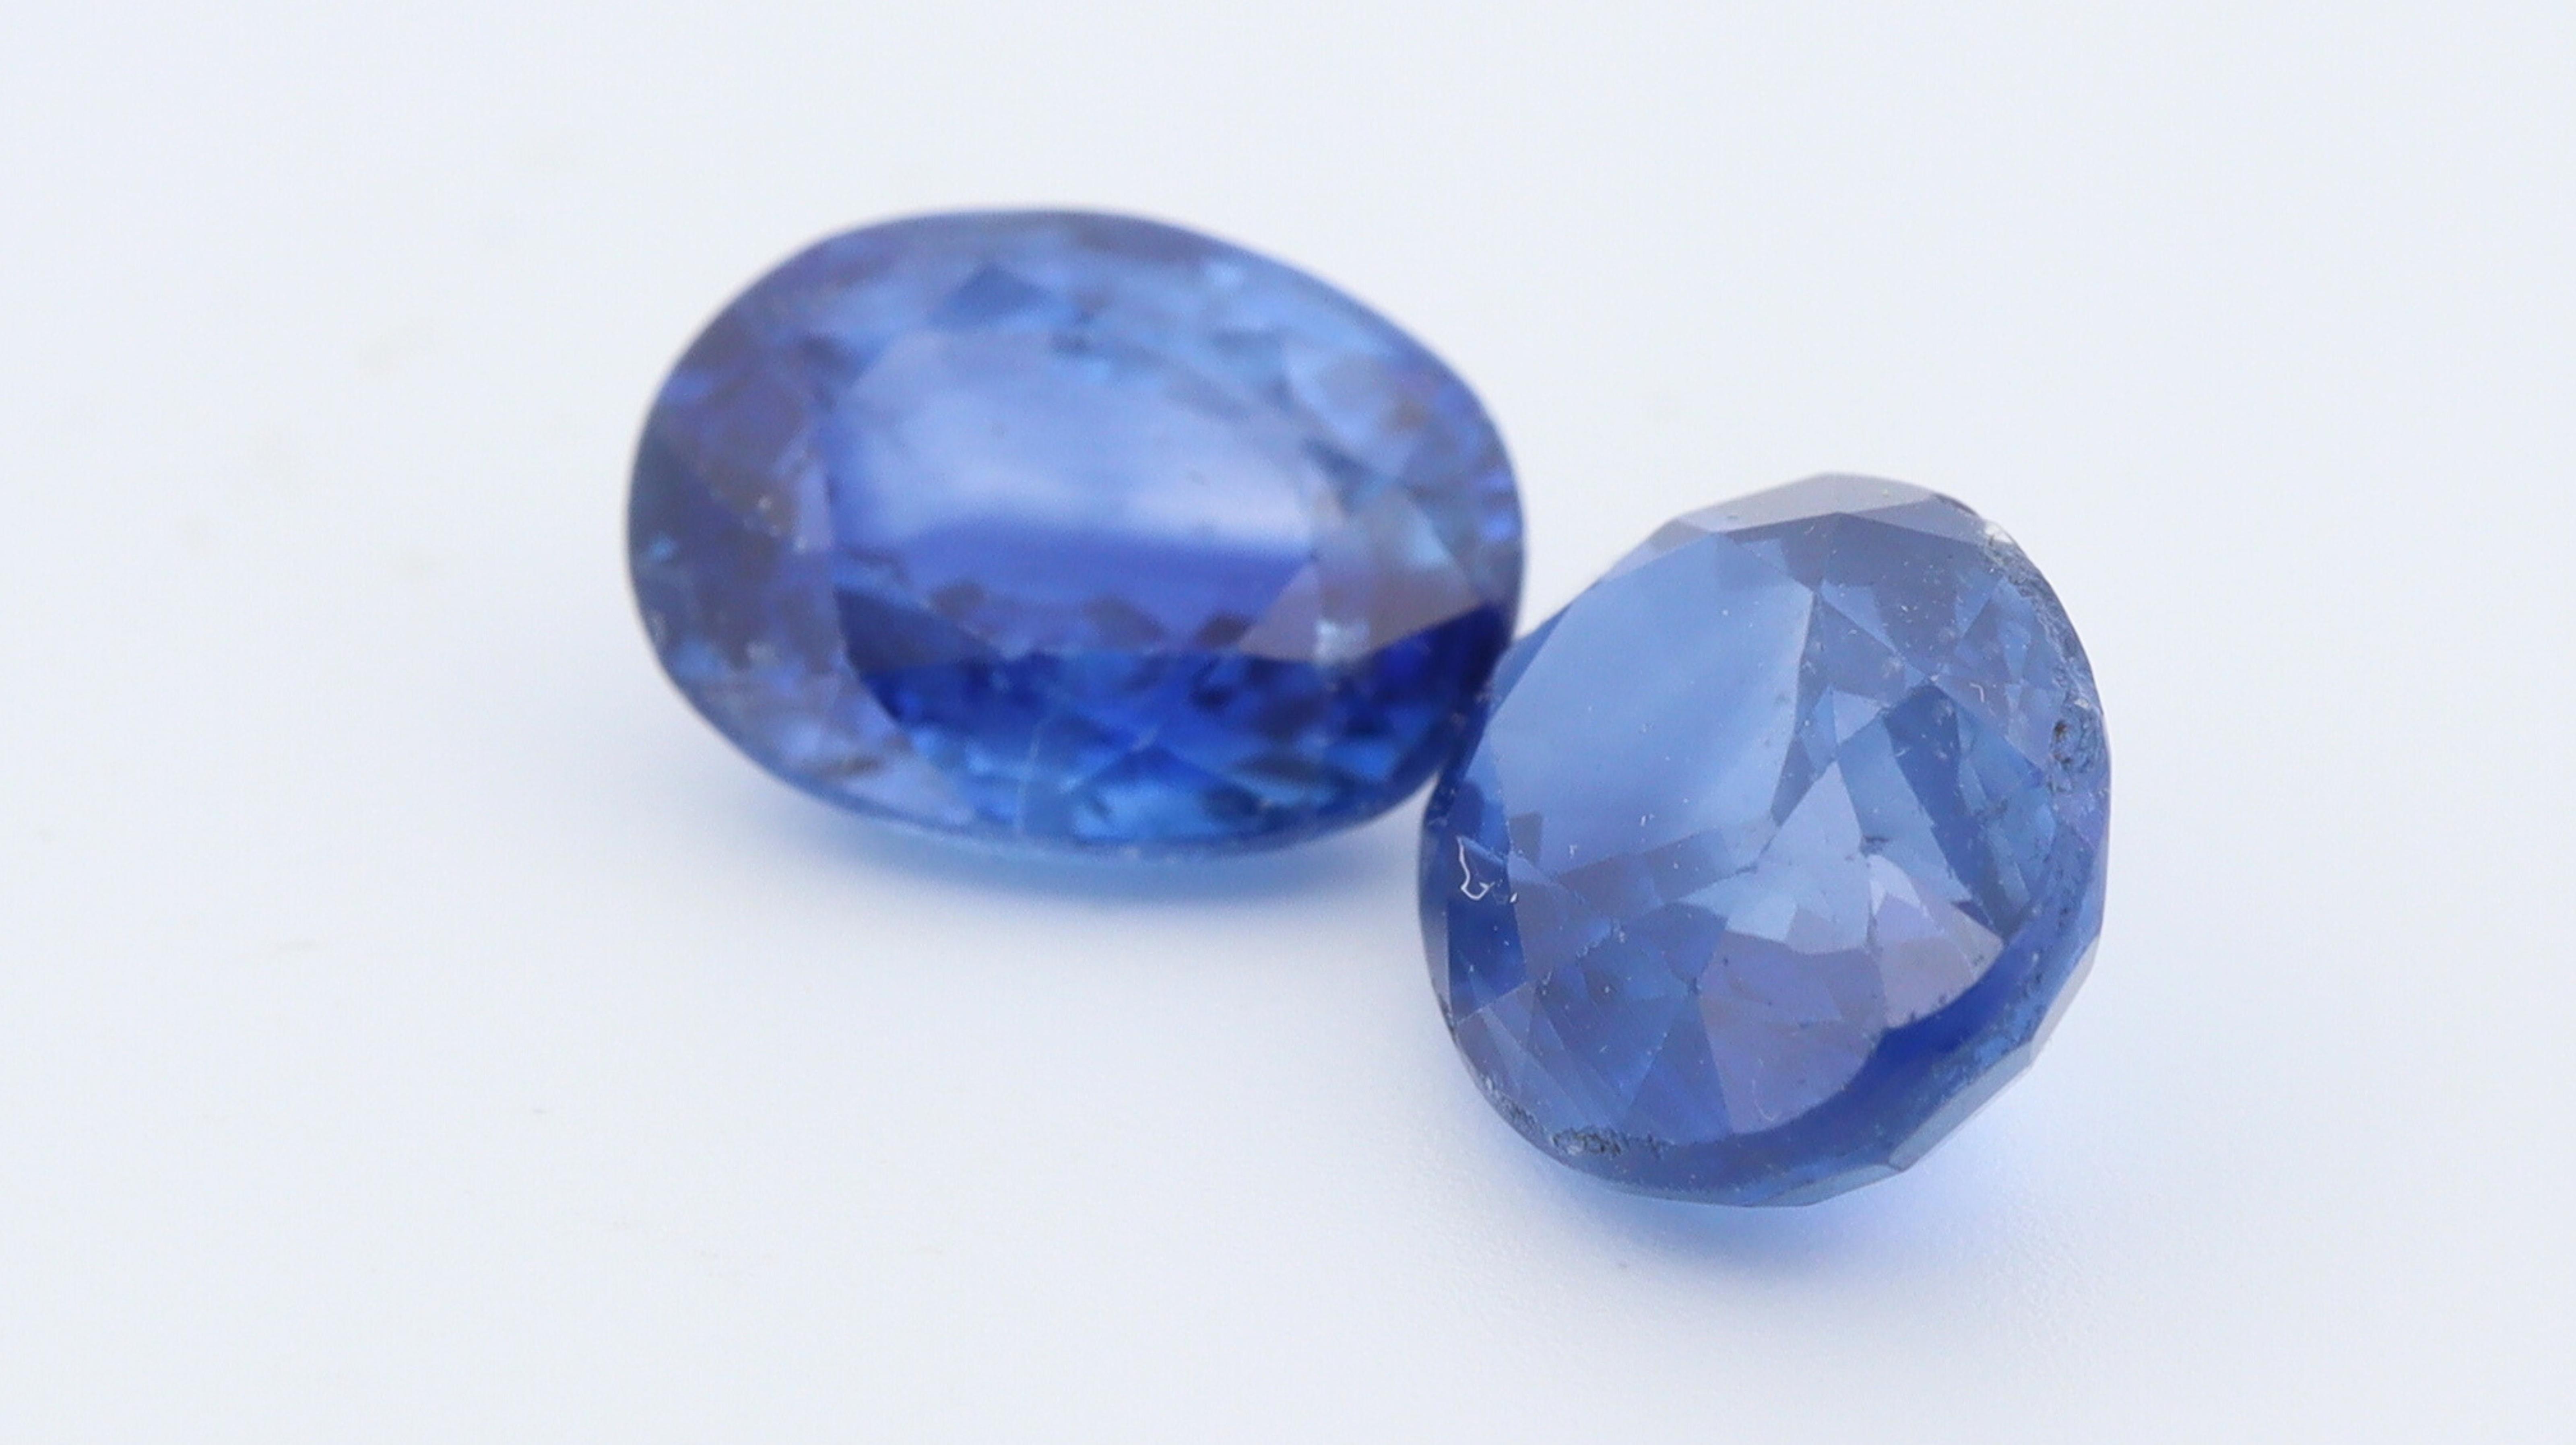 Modern Certified Pair of Oval Blue Sapphires from Sri Lanka - 2.82ct For Sale